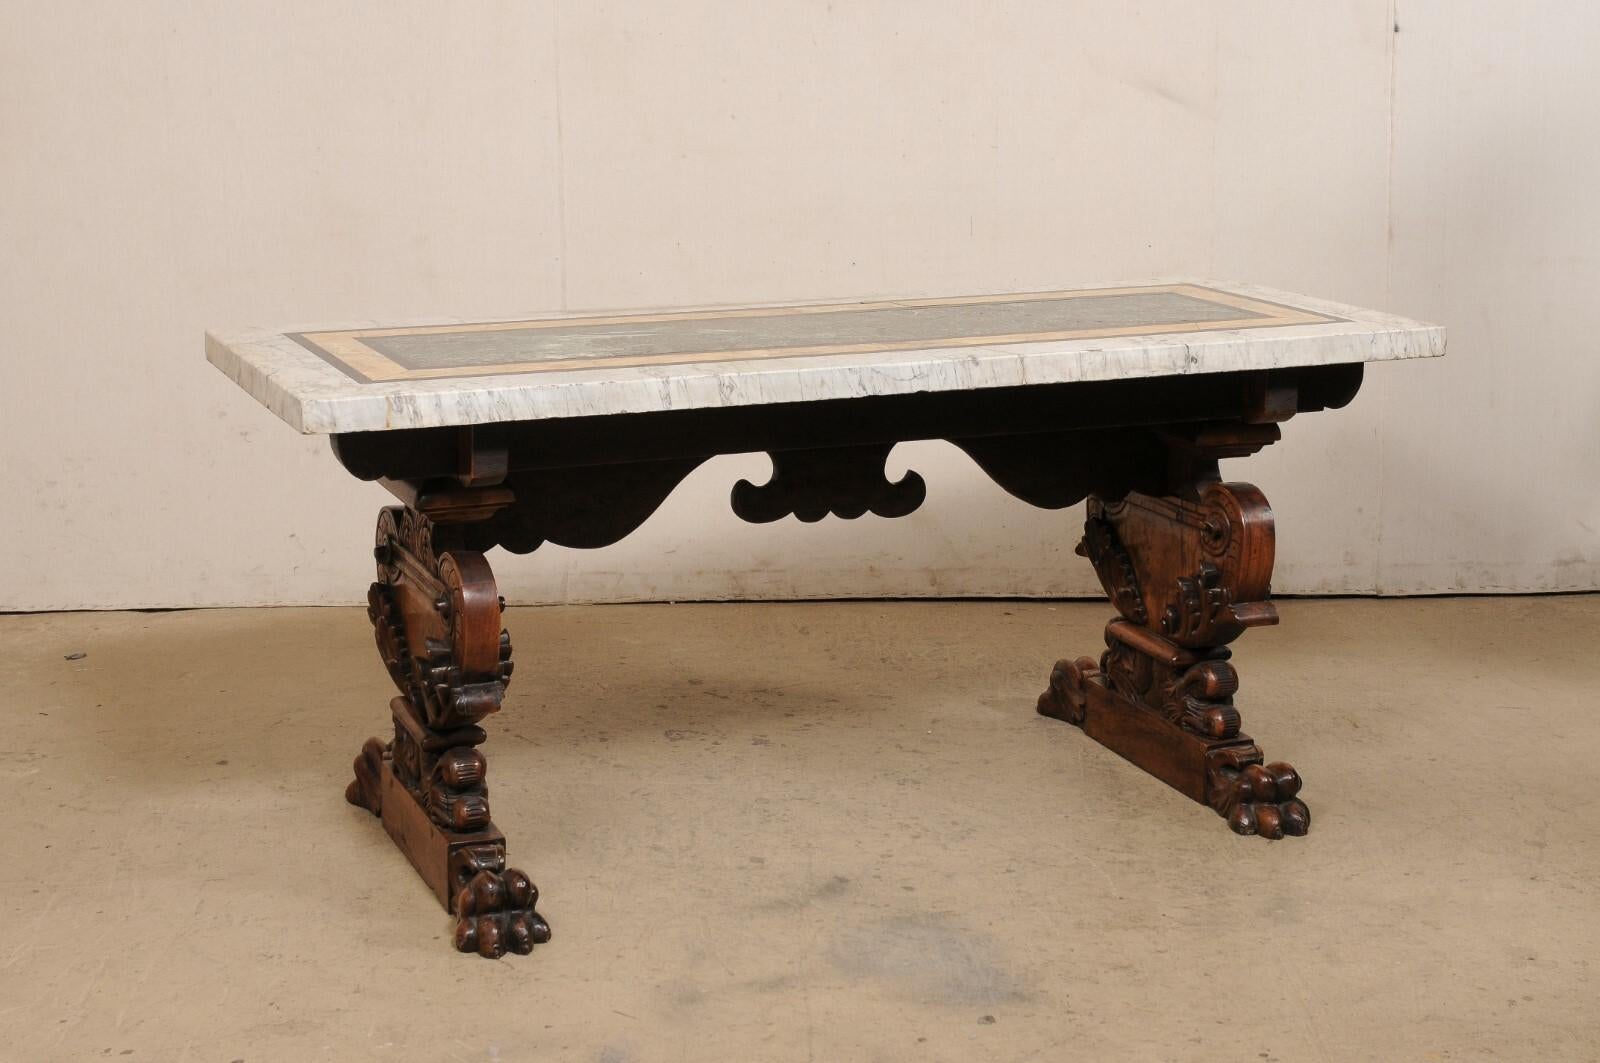 A Gorgeous 18th C Italian Inlaid Marble Top Table w/Robustly Carved Trestle Legs For Sale 6